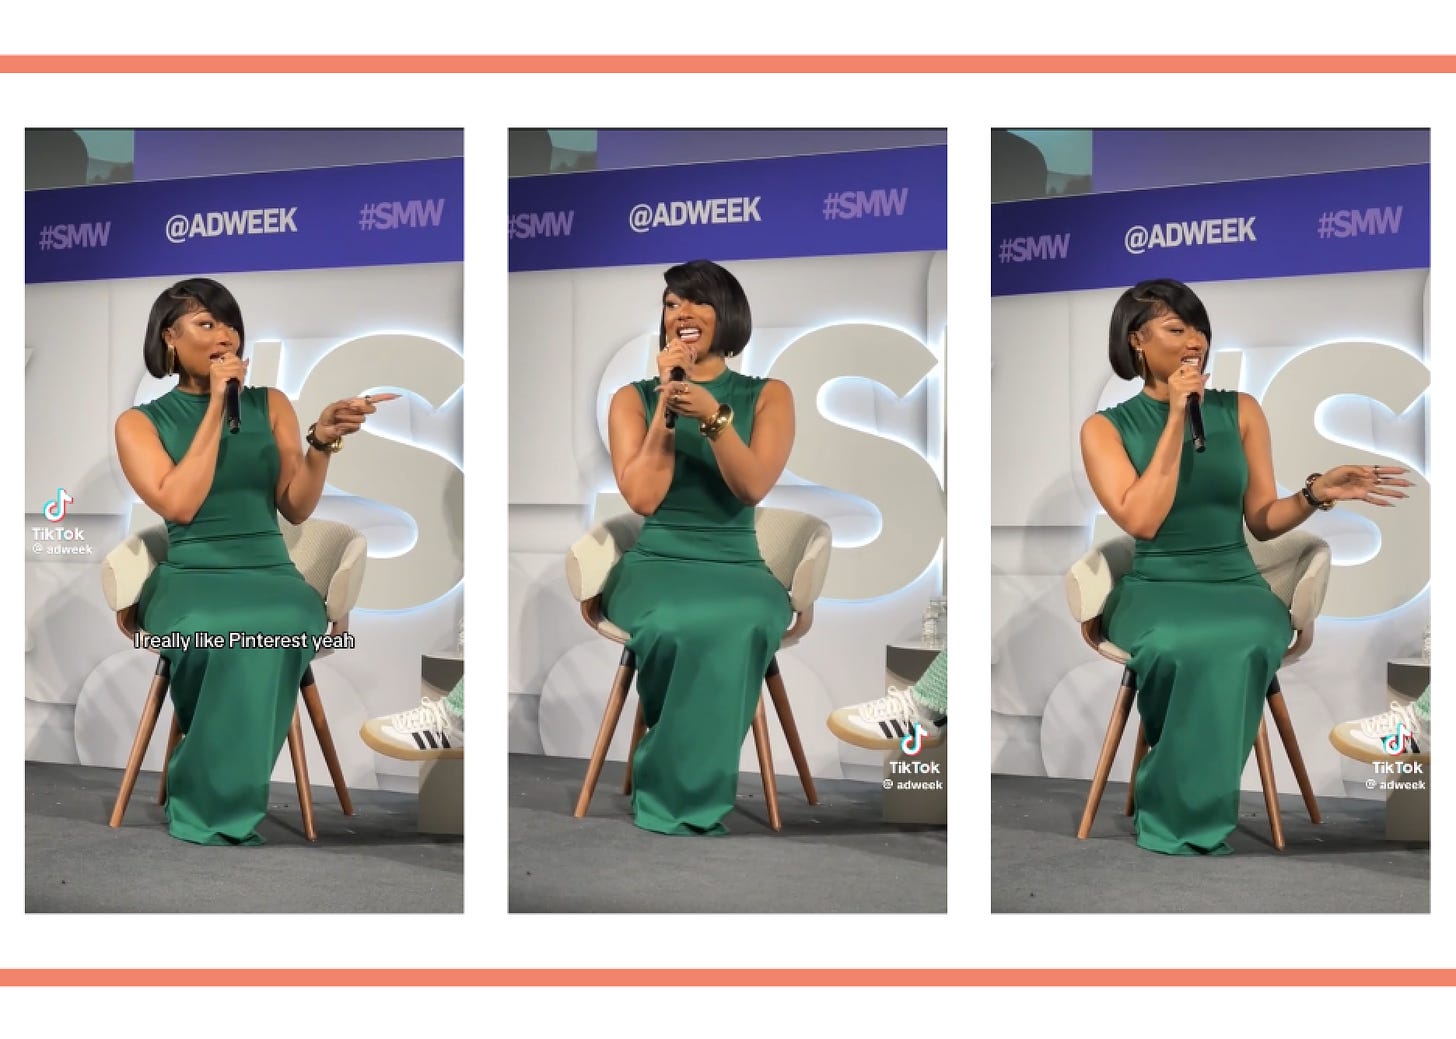 TikTok screenshots of Megan Thee Stallion in a green dress being interviewed at Social Media Week. Text says "I really like Pinterest year"